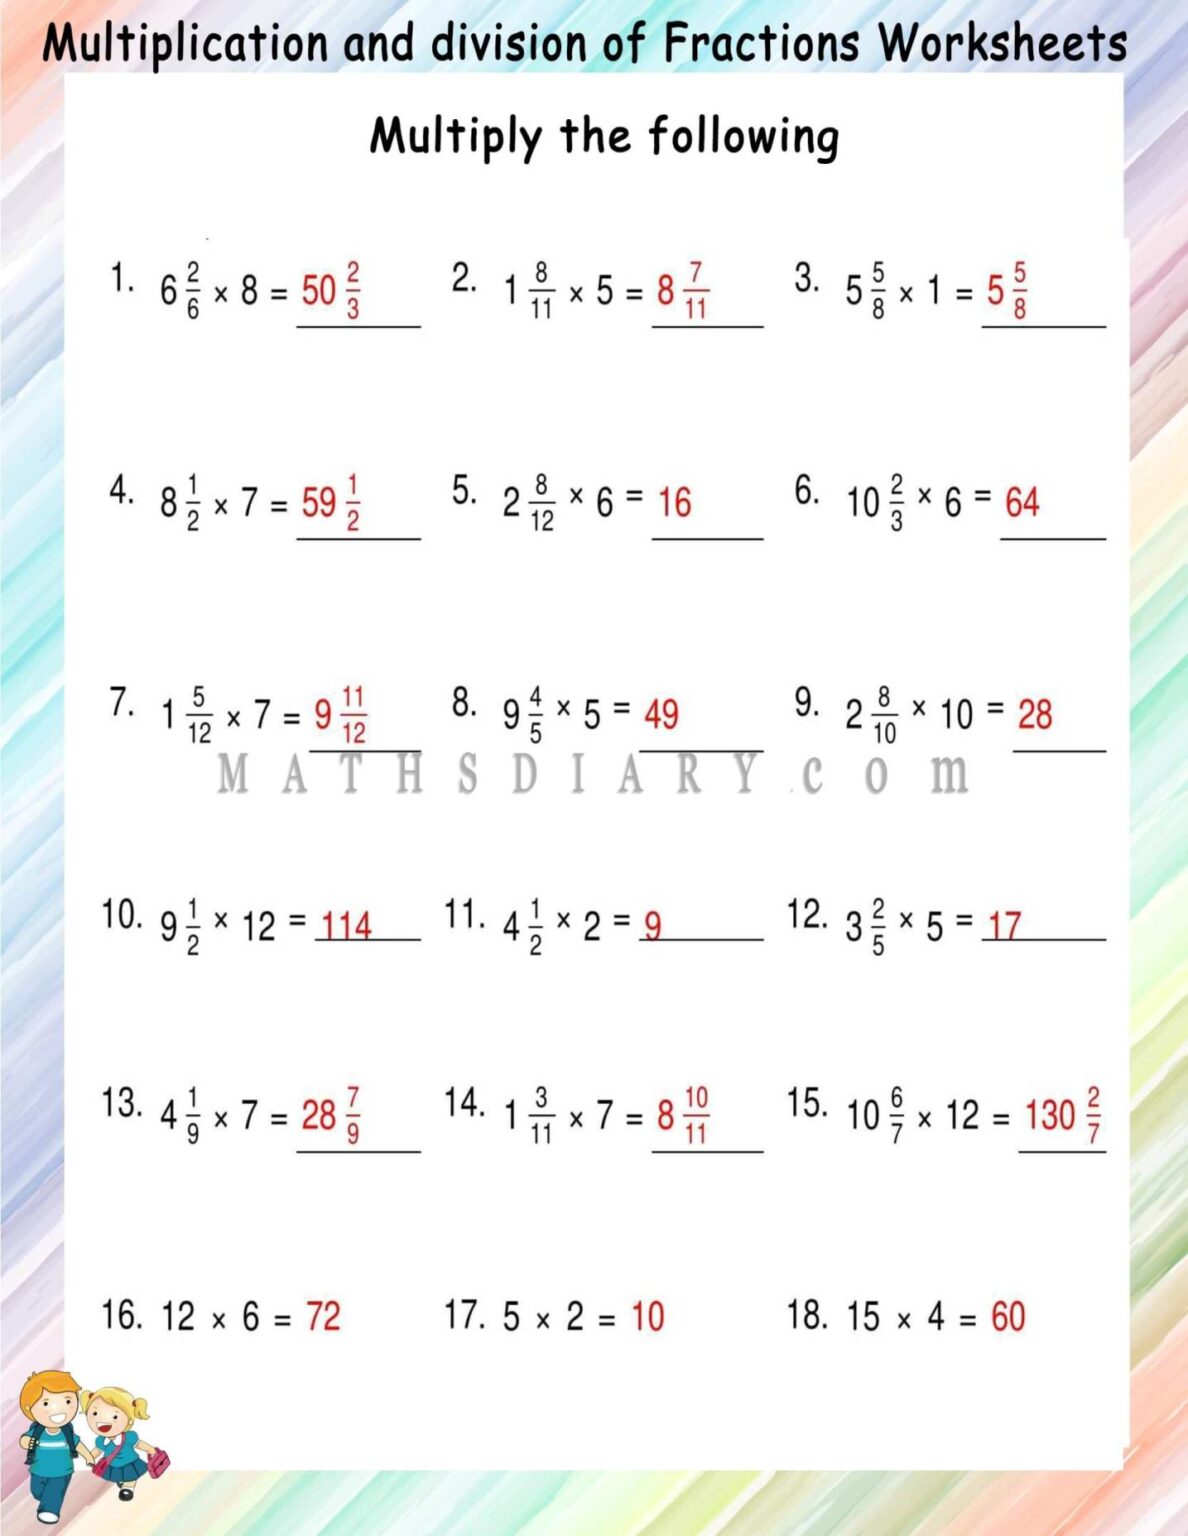 mixed-multiplication-of-fractions-worksheets-math-worksheets